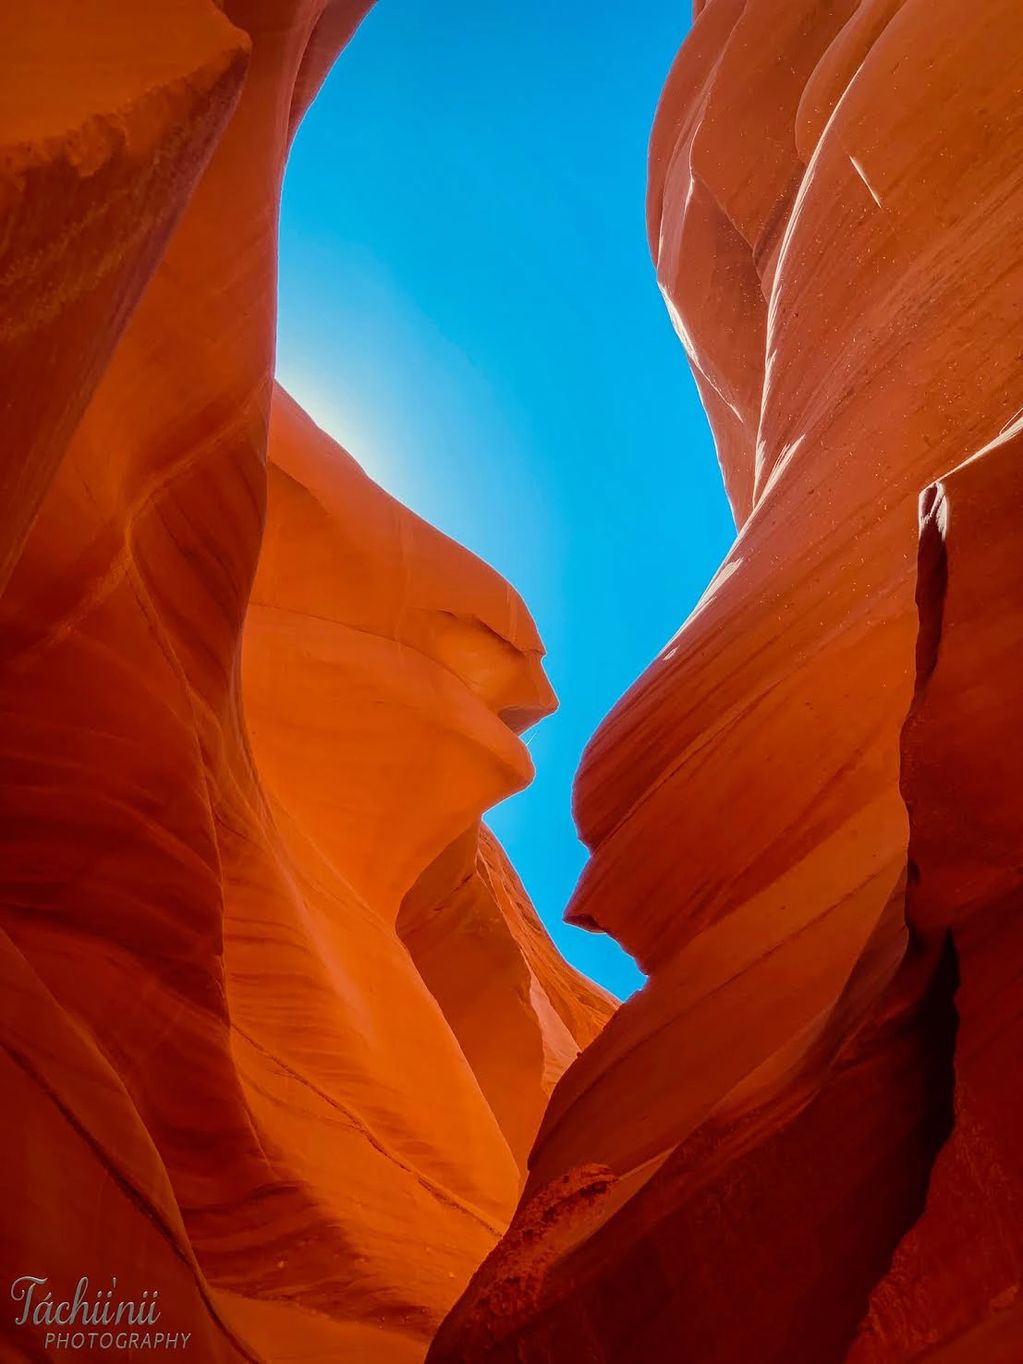 Antelope Canyon - face to face 
20 by 24 with 1-inch white border on archival paper. 